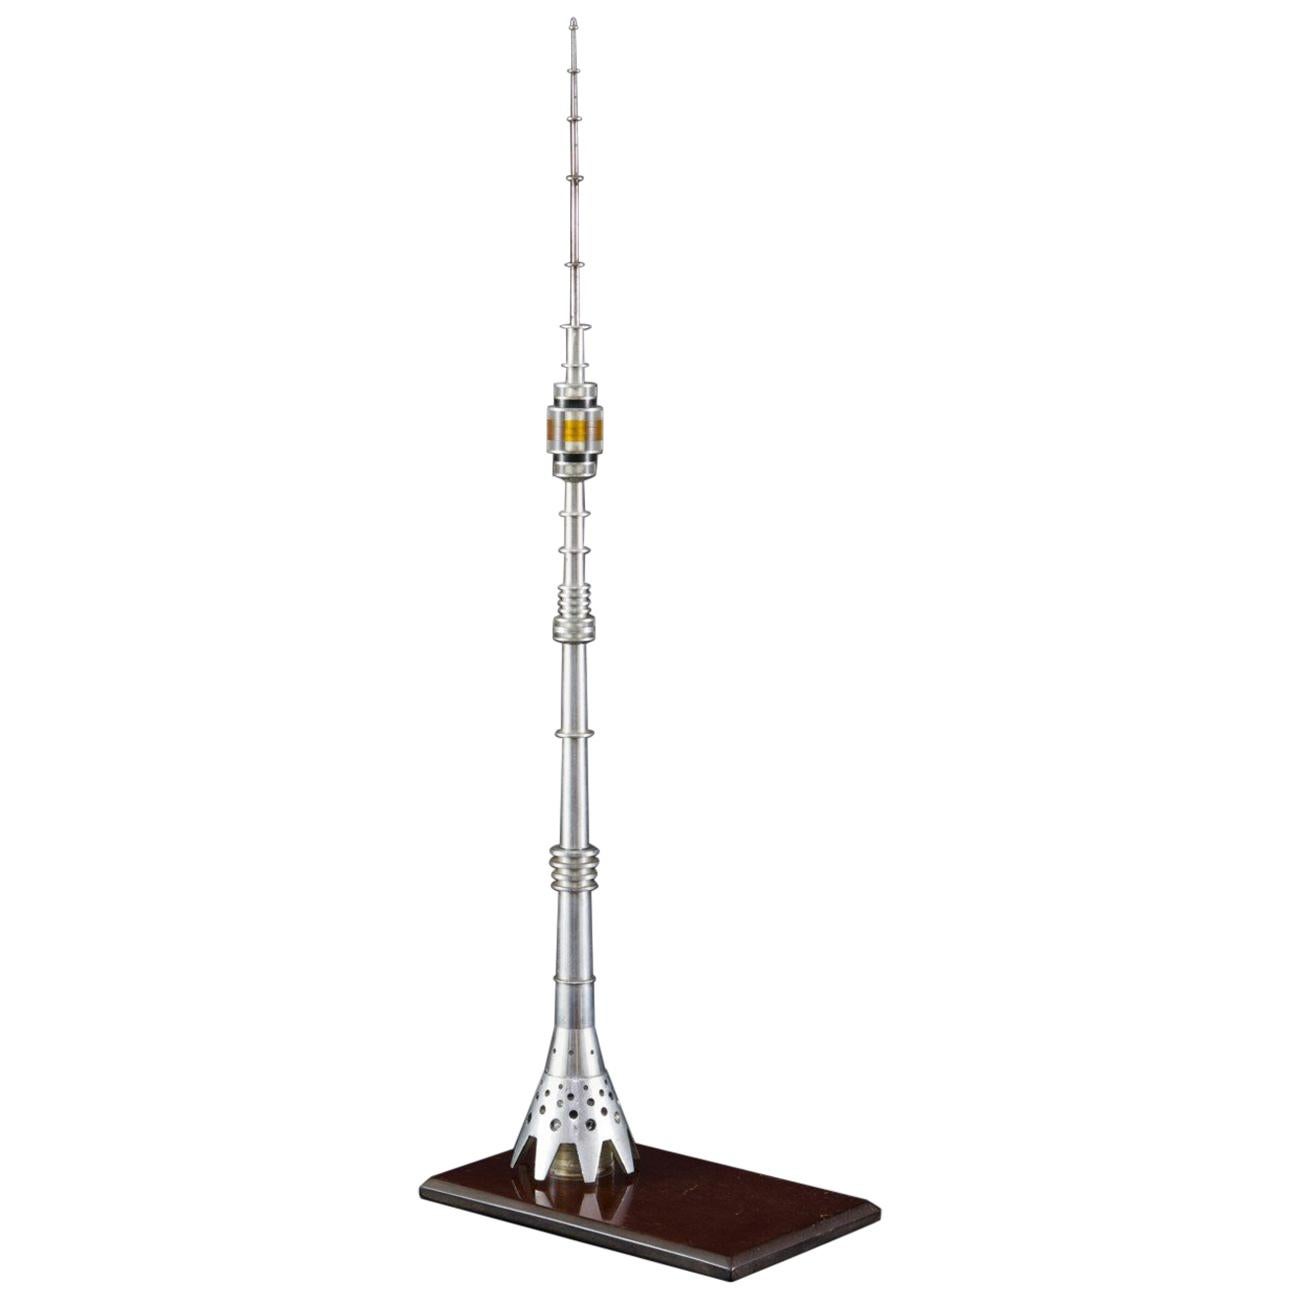 Architectural Model of the Ostankino Tower, Moscow, circa 1967 For Sale